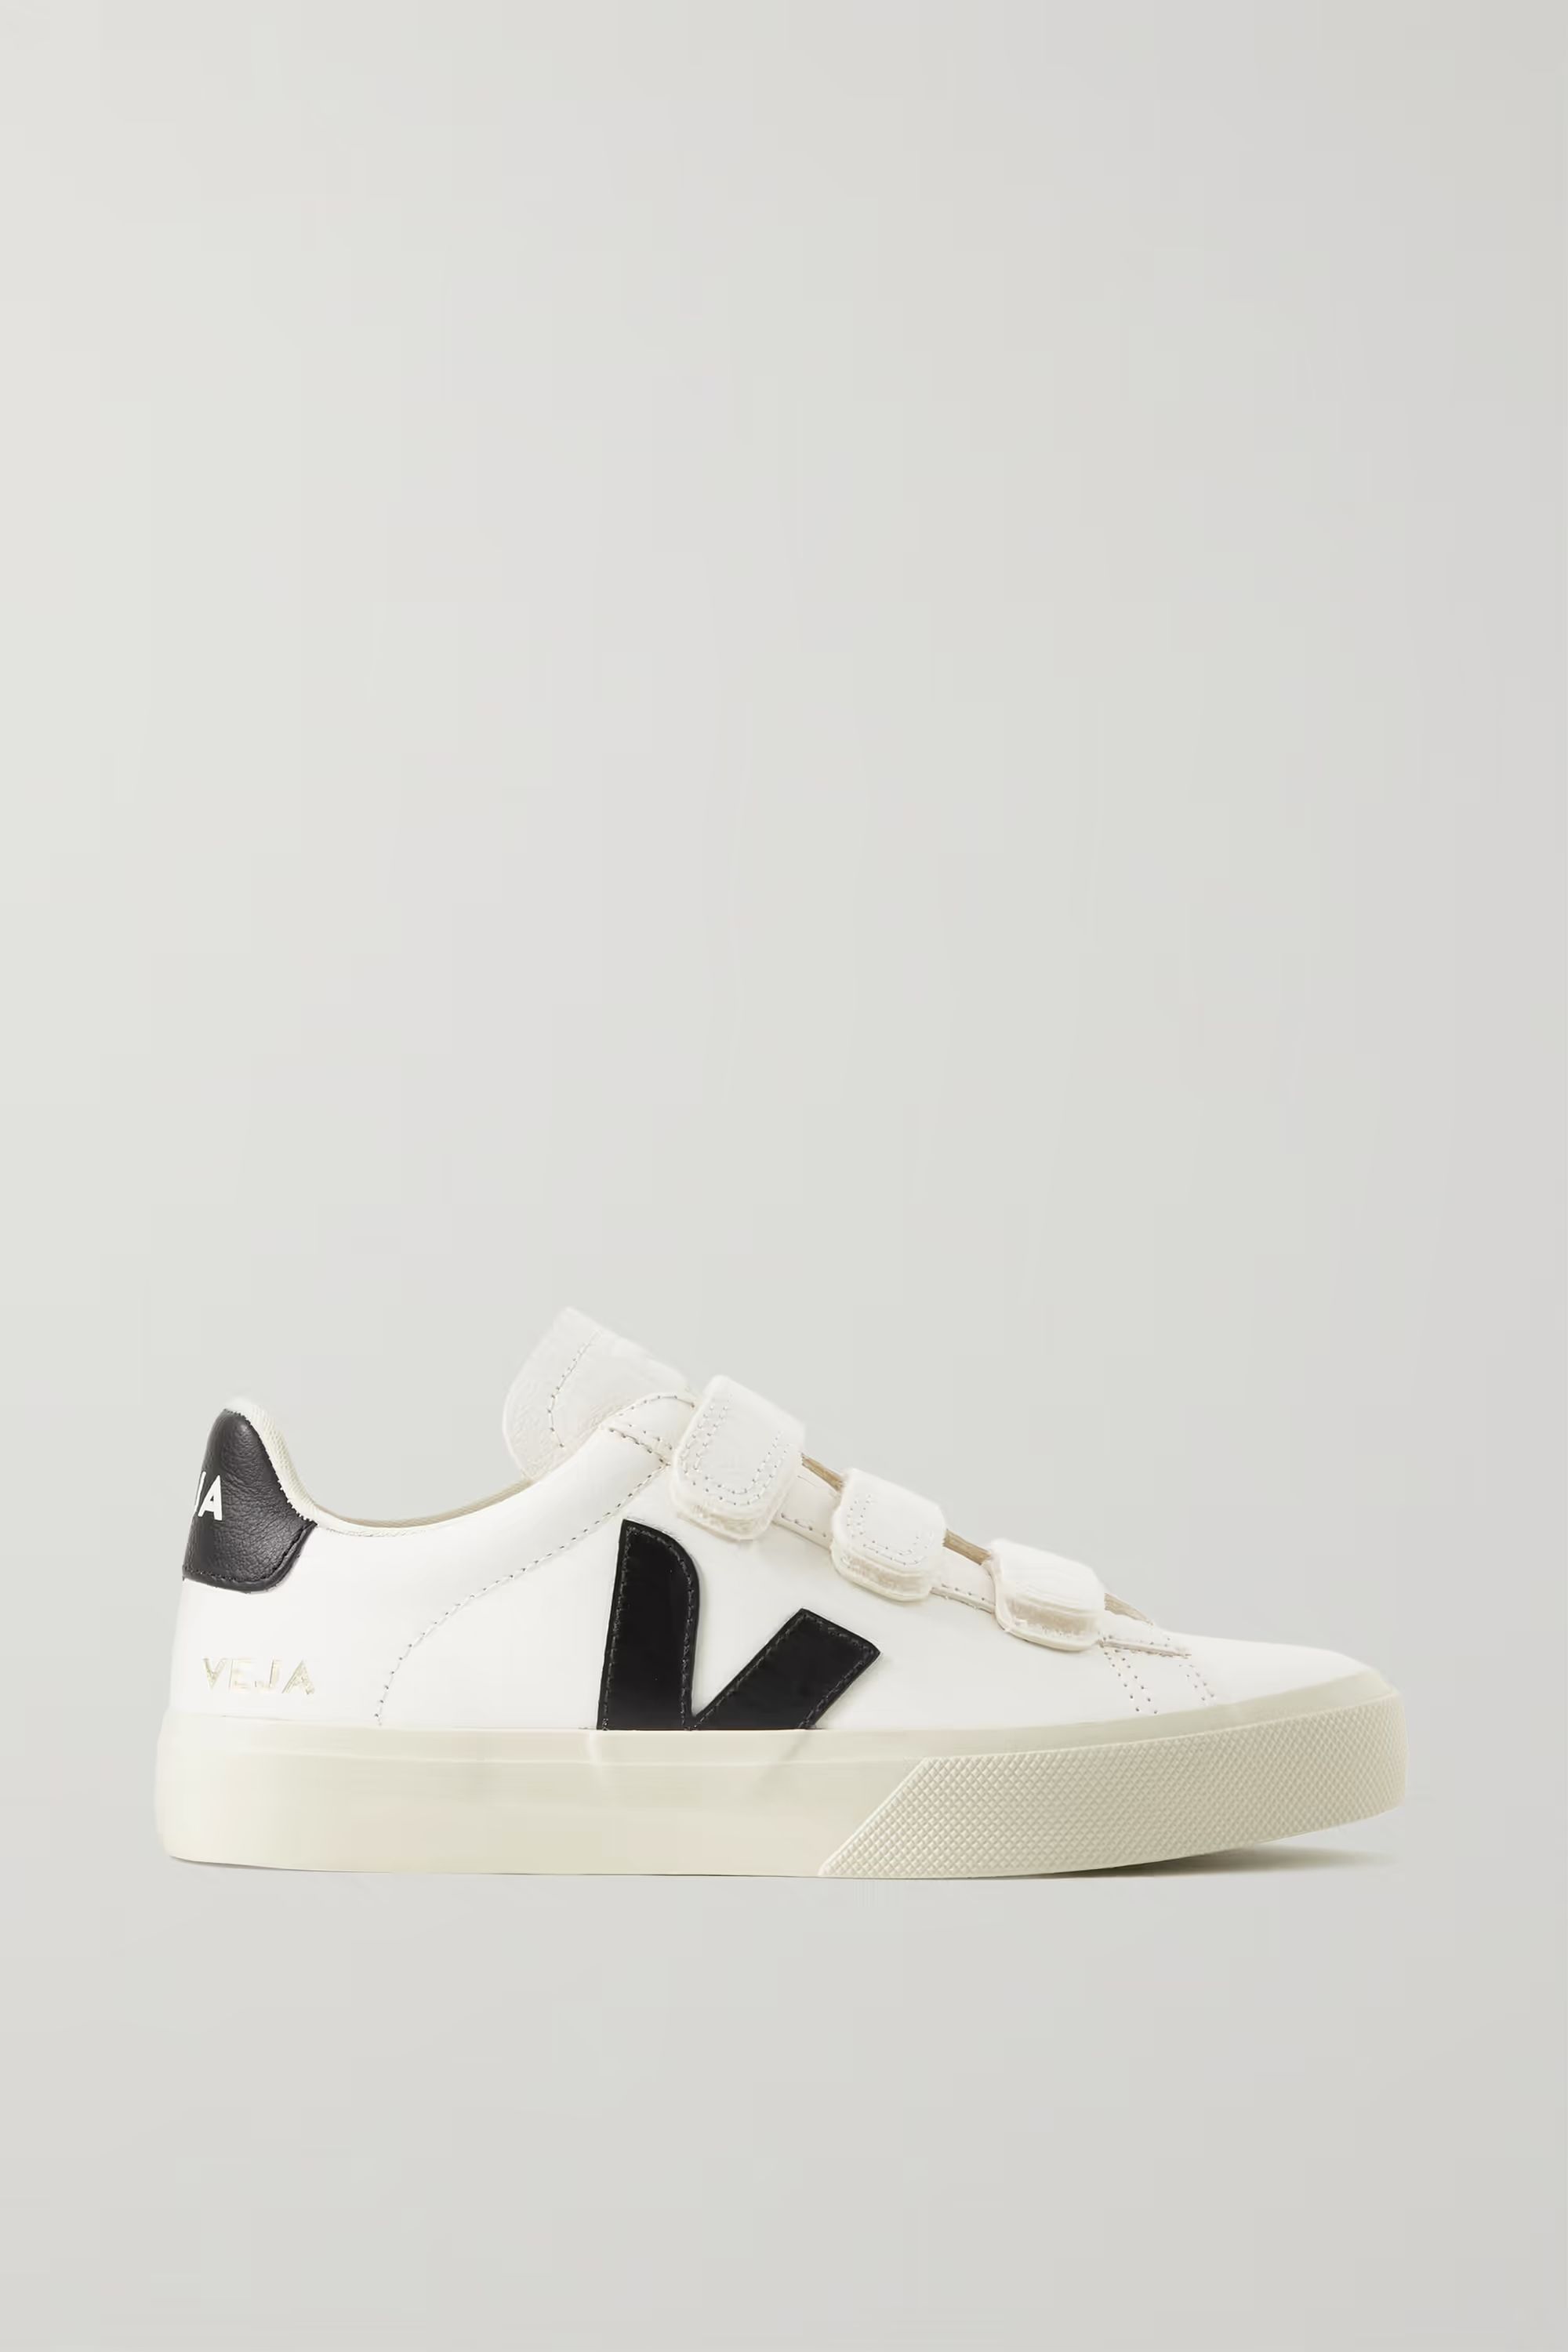 Recife rubber-trimmed leather sneakers | NET-A-PORTER (US)